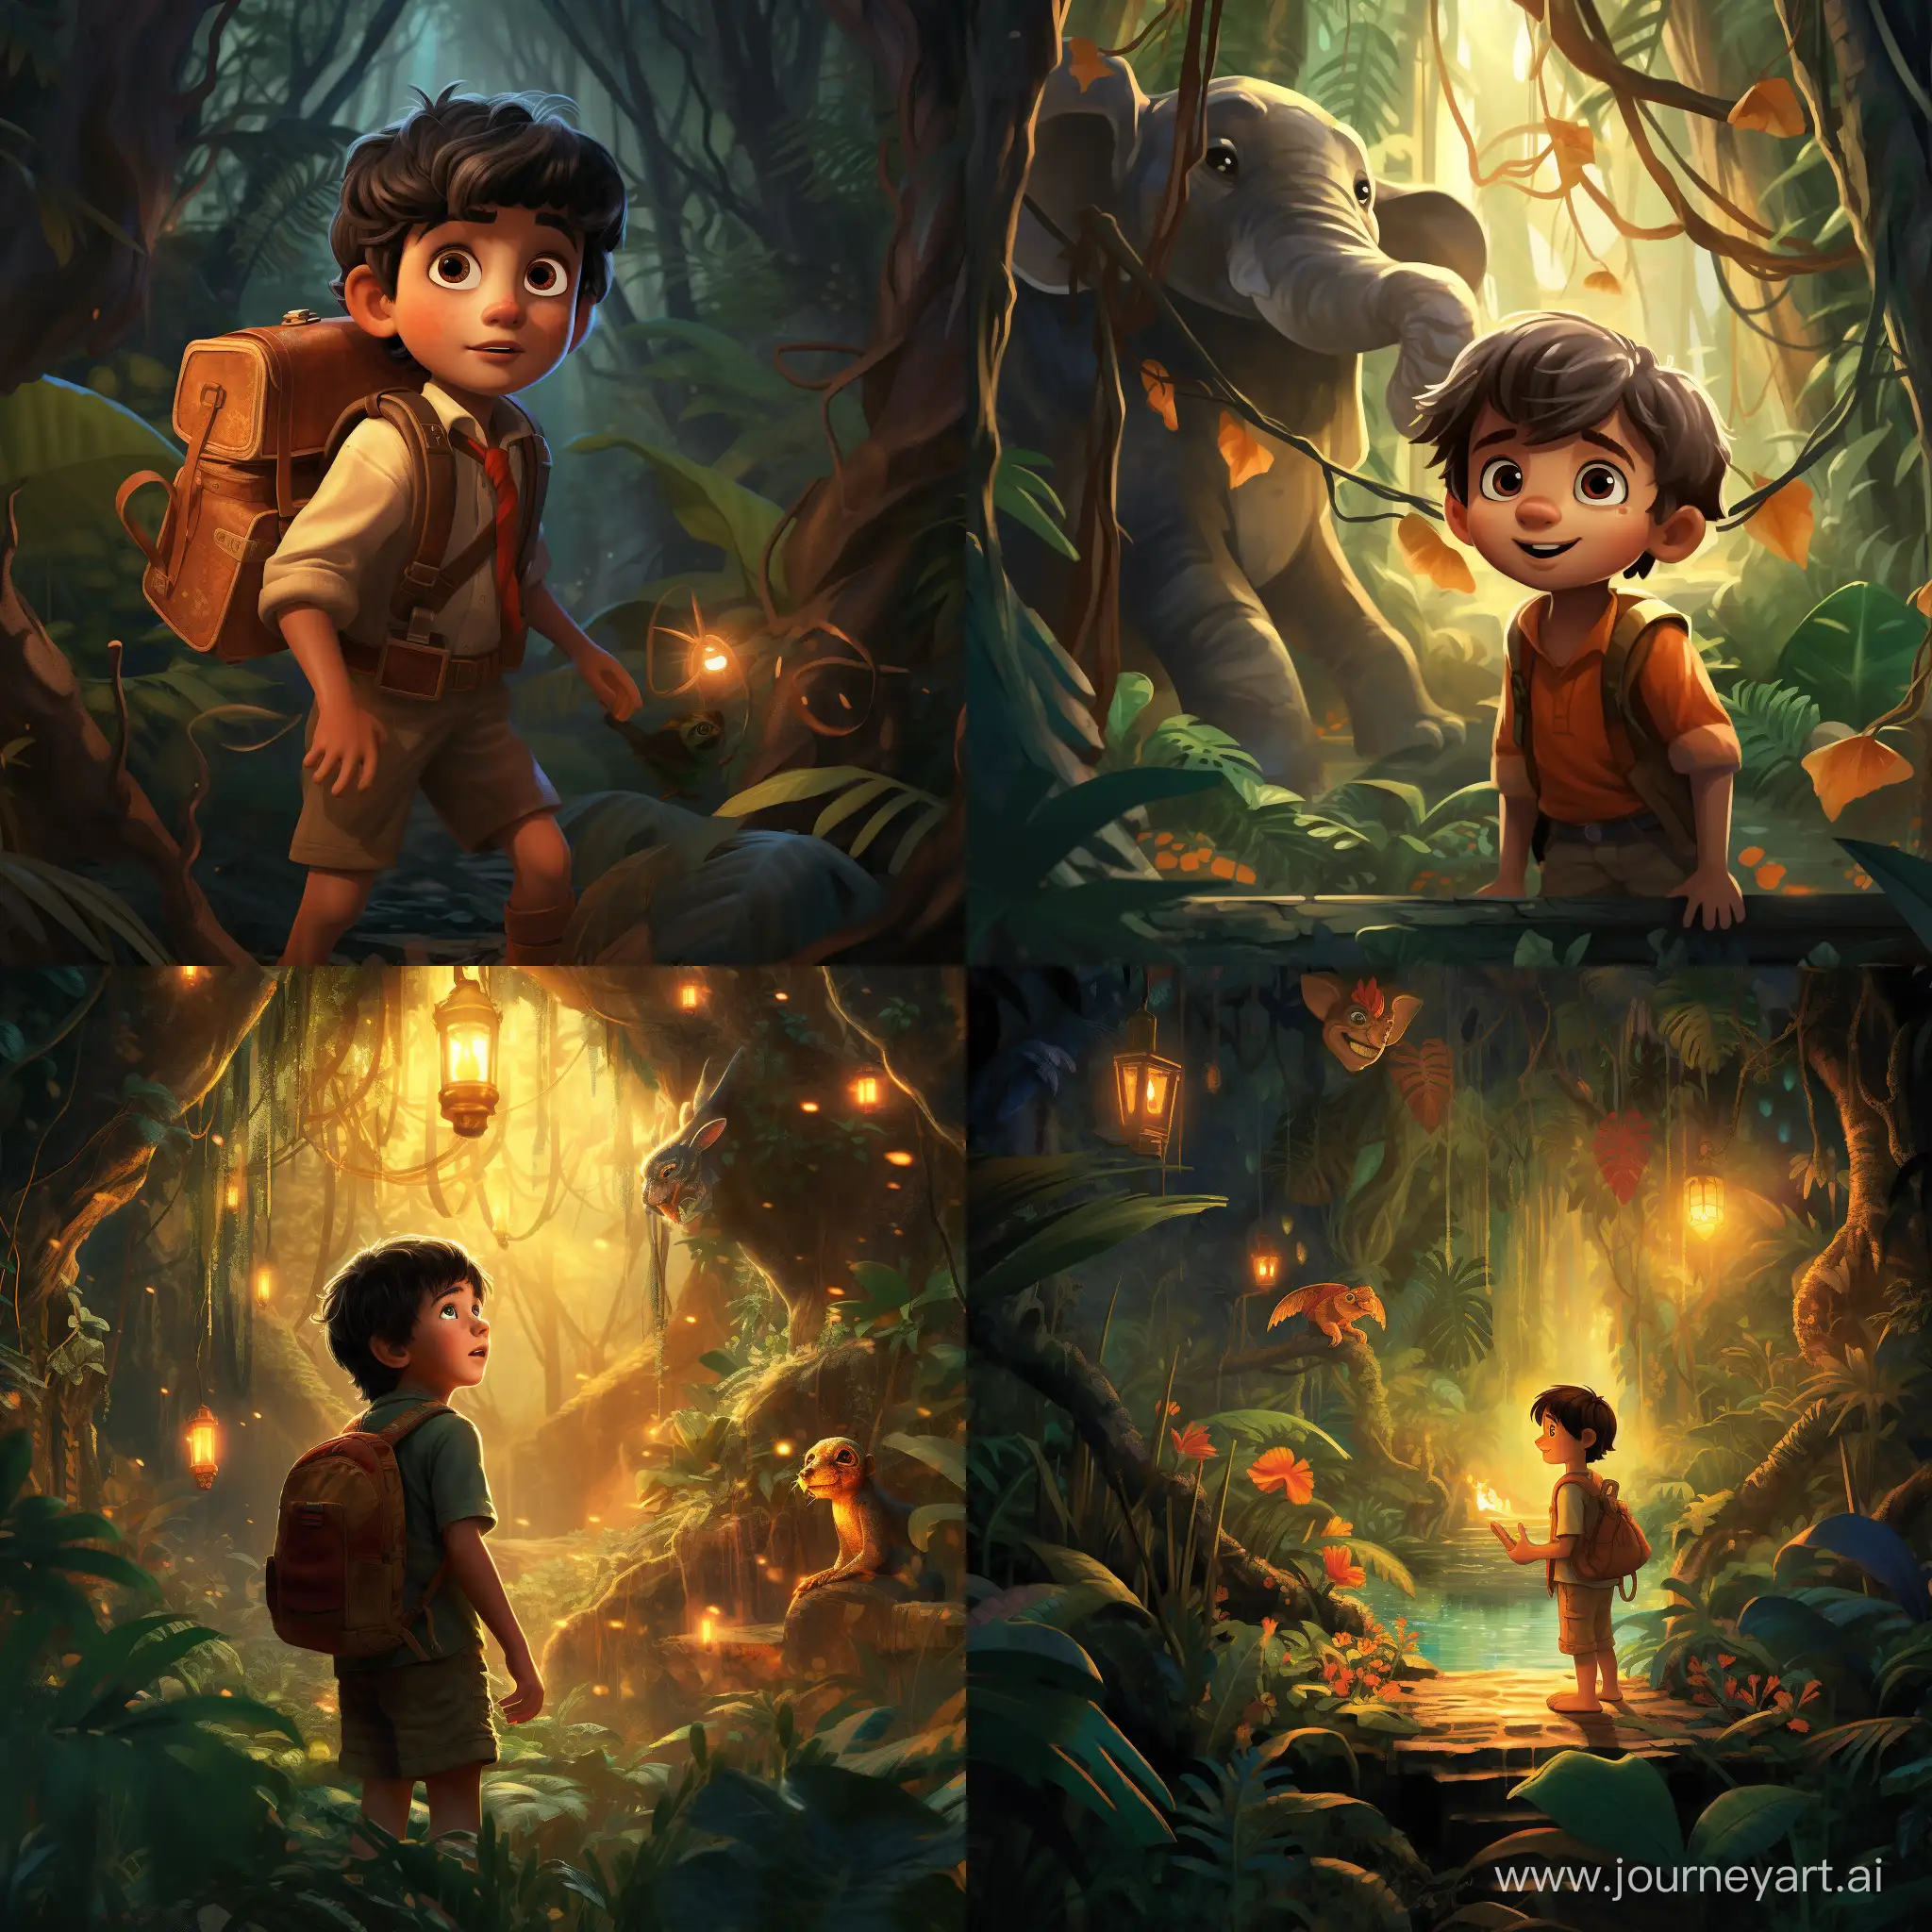 Max receives a mysterious invitation to embark on an adventure in the Enchanted Jungle.